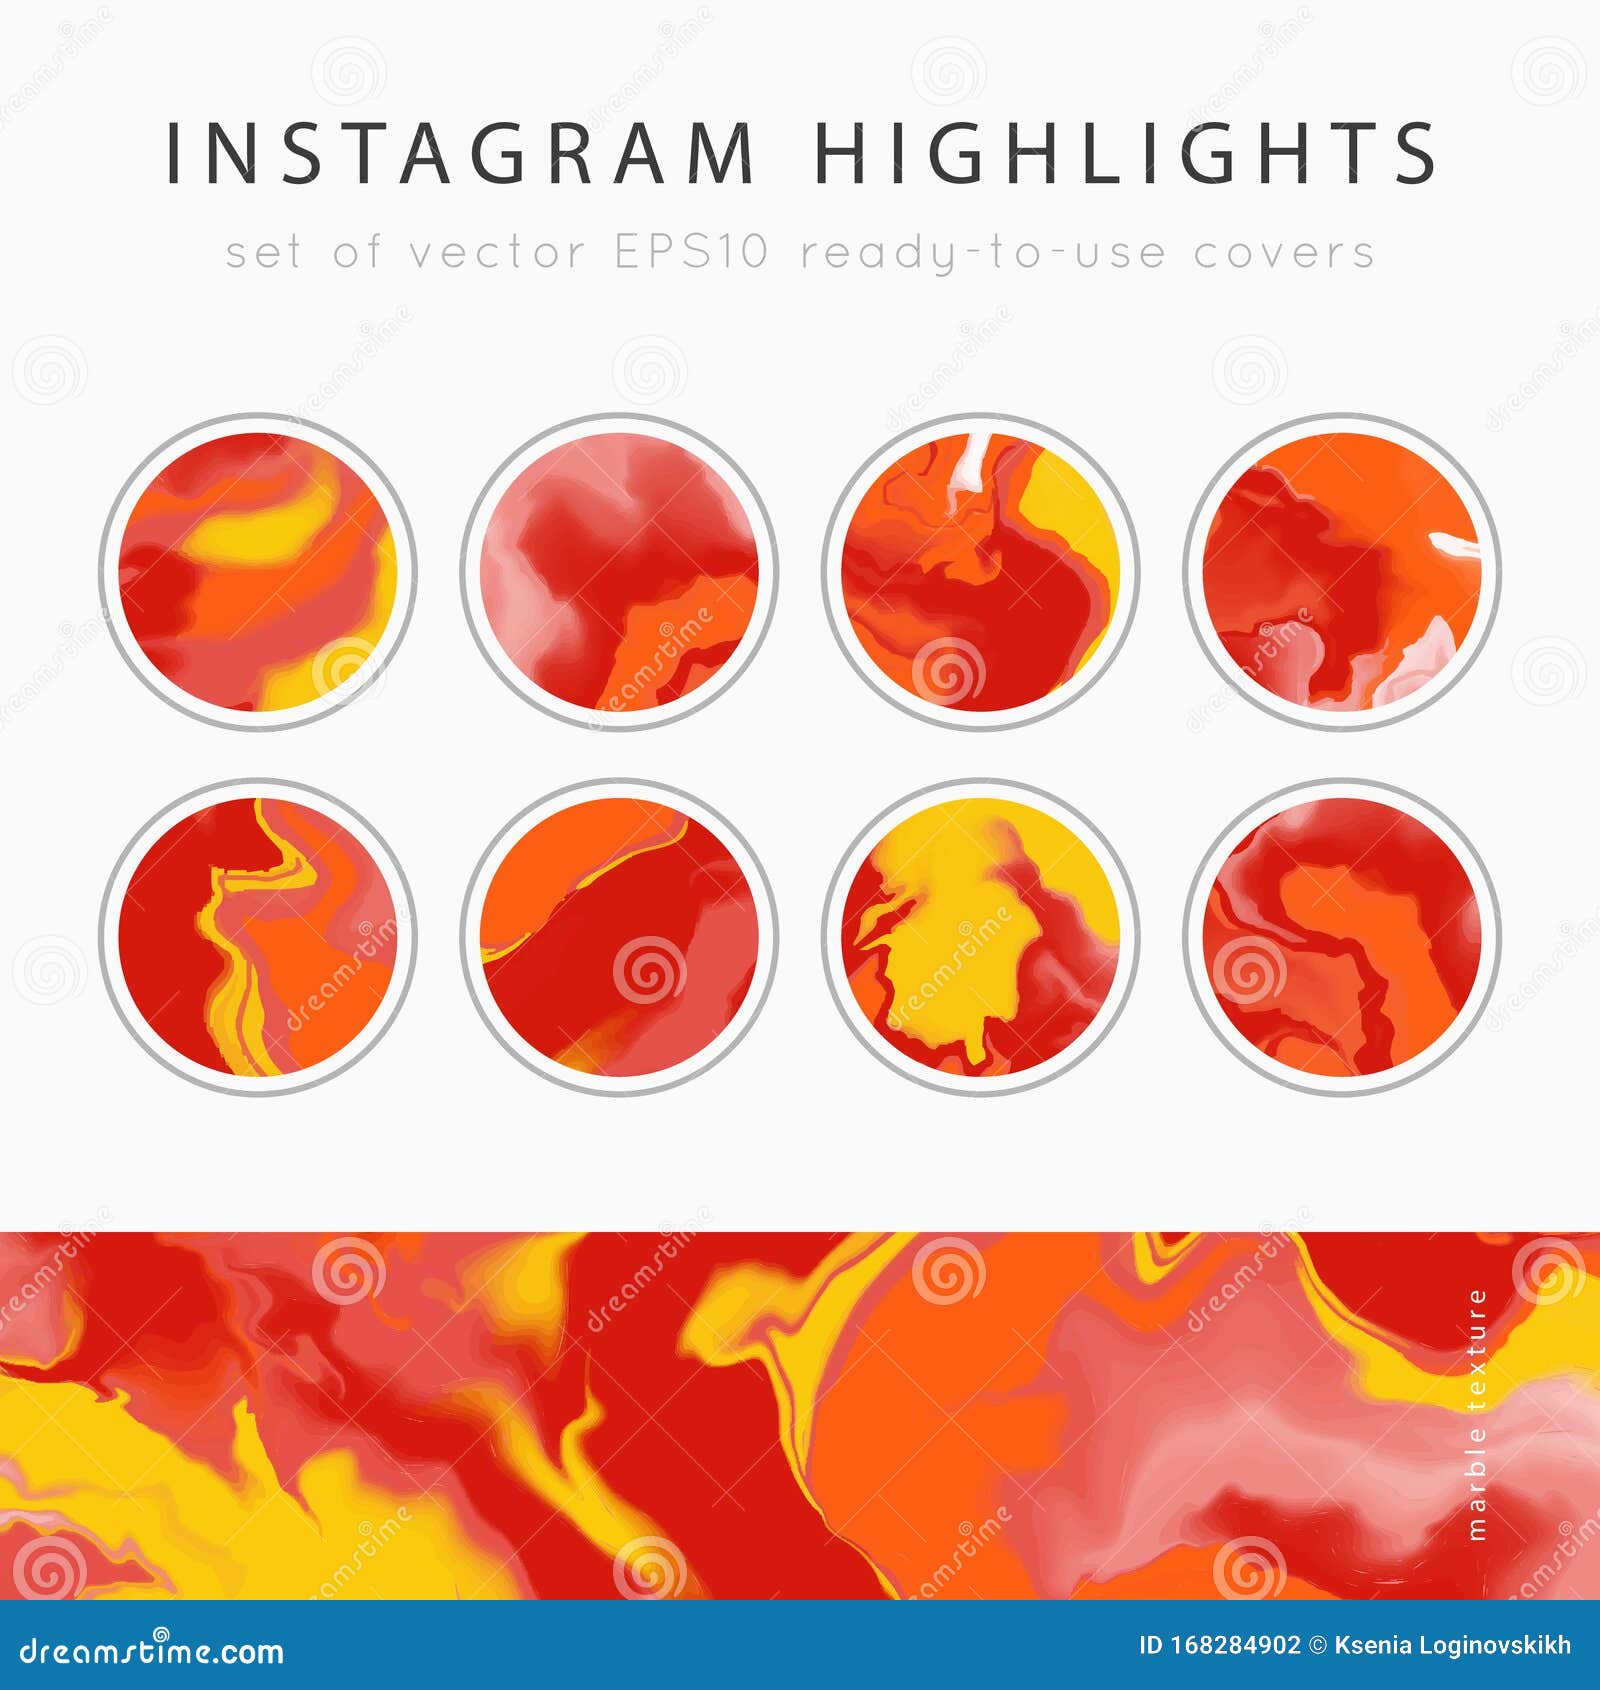 Instagram Highlight Covers Vector Stock Illustration Illustration Of Covers Badge 168284902